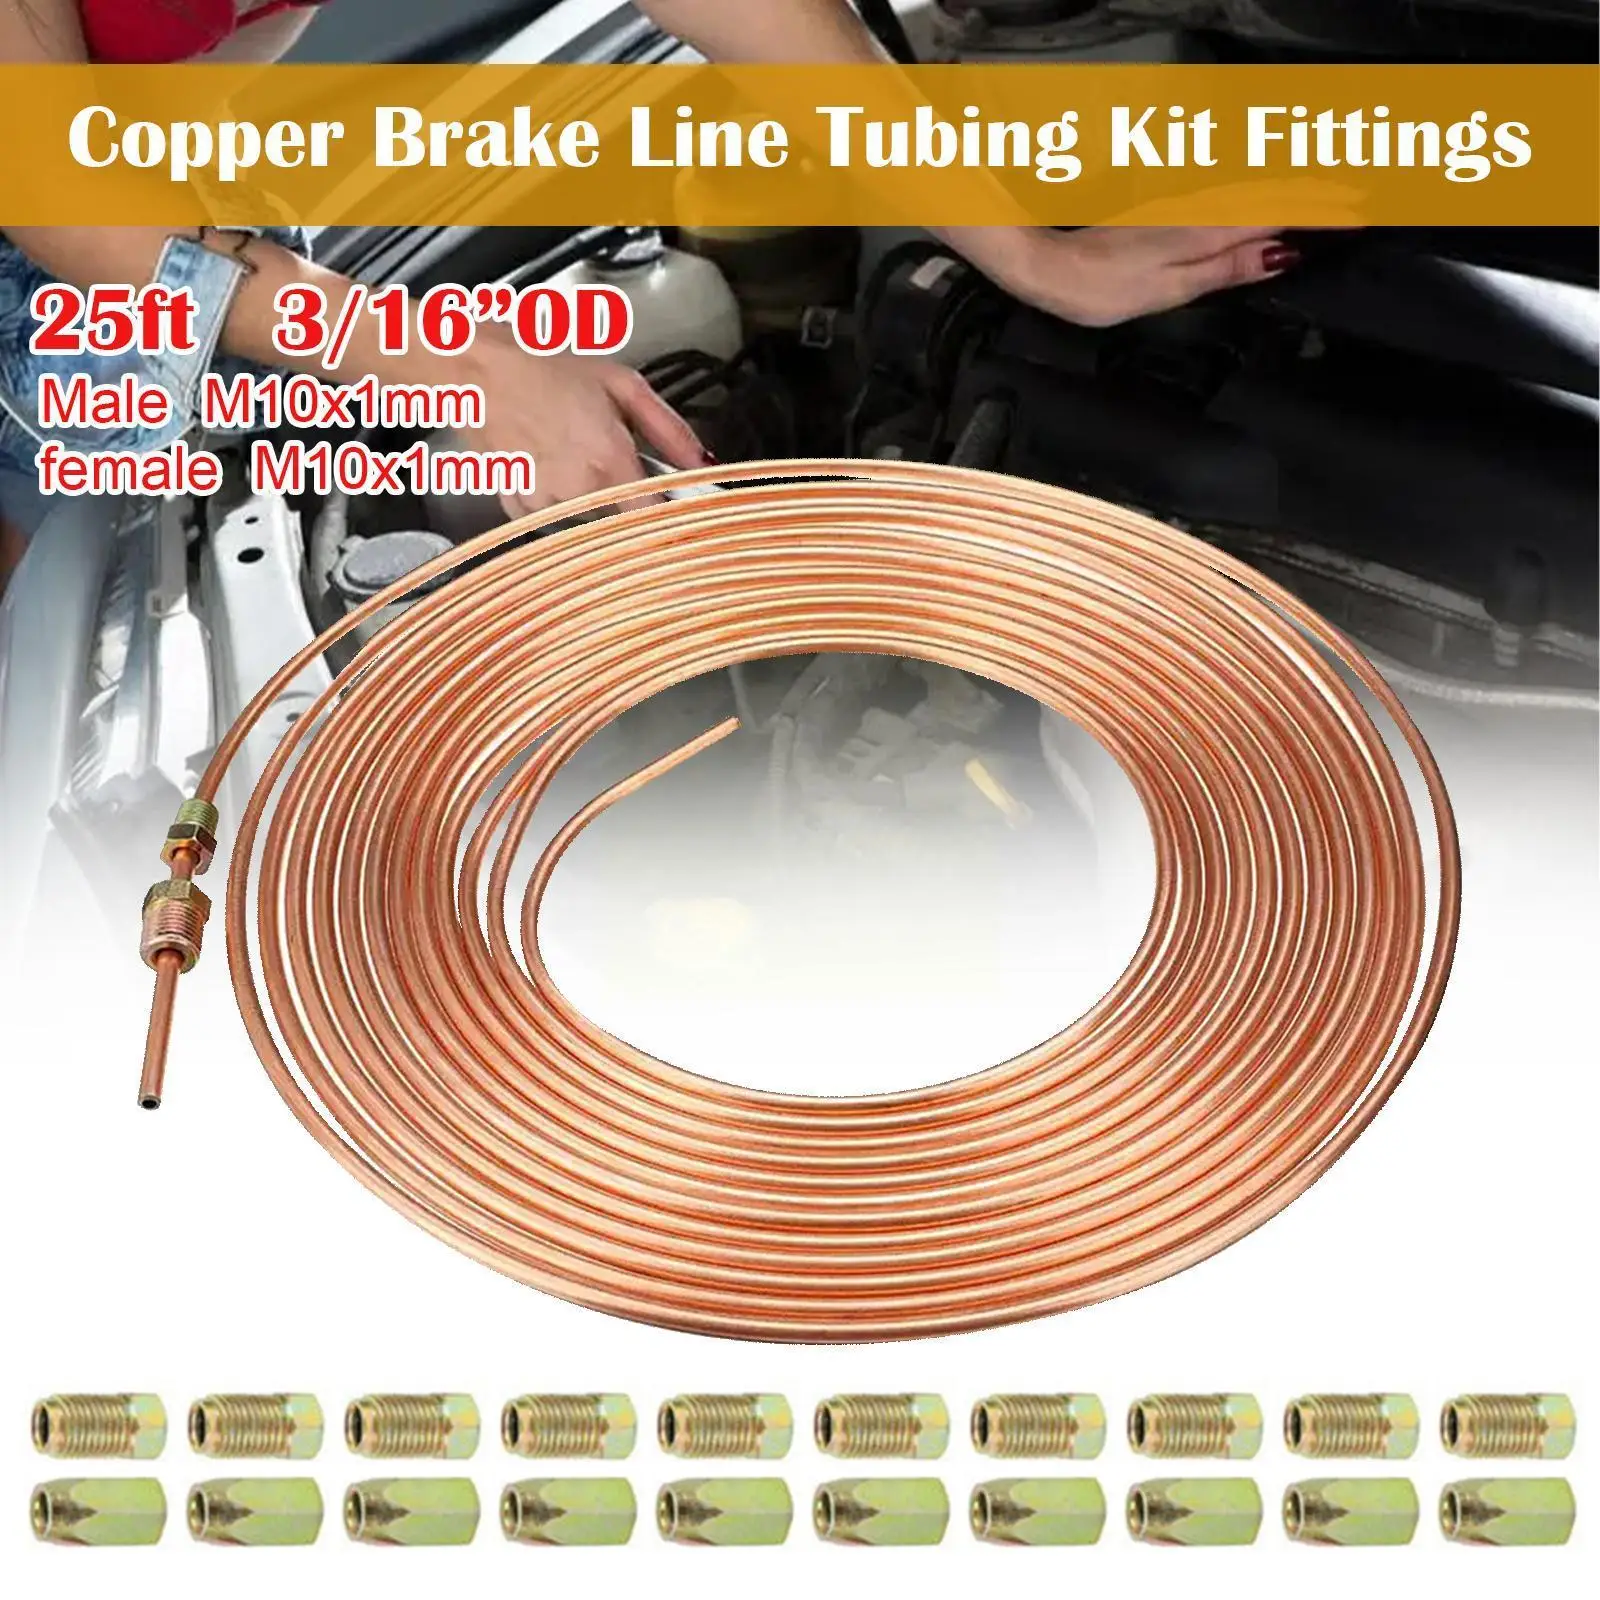 

25ft 7.62m Car Roll Tube Coil Of 3/16" OD Copper Nickel Piping Anti-rust Hose Nuts Line With Tubing Brake Pipe Tube Tube 16 C5U2